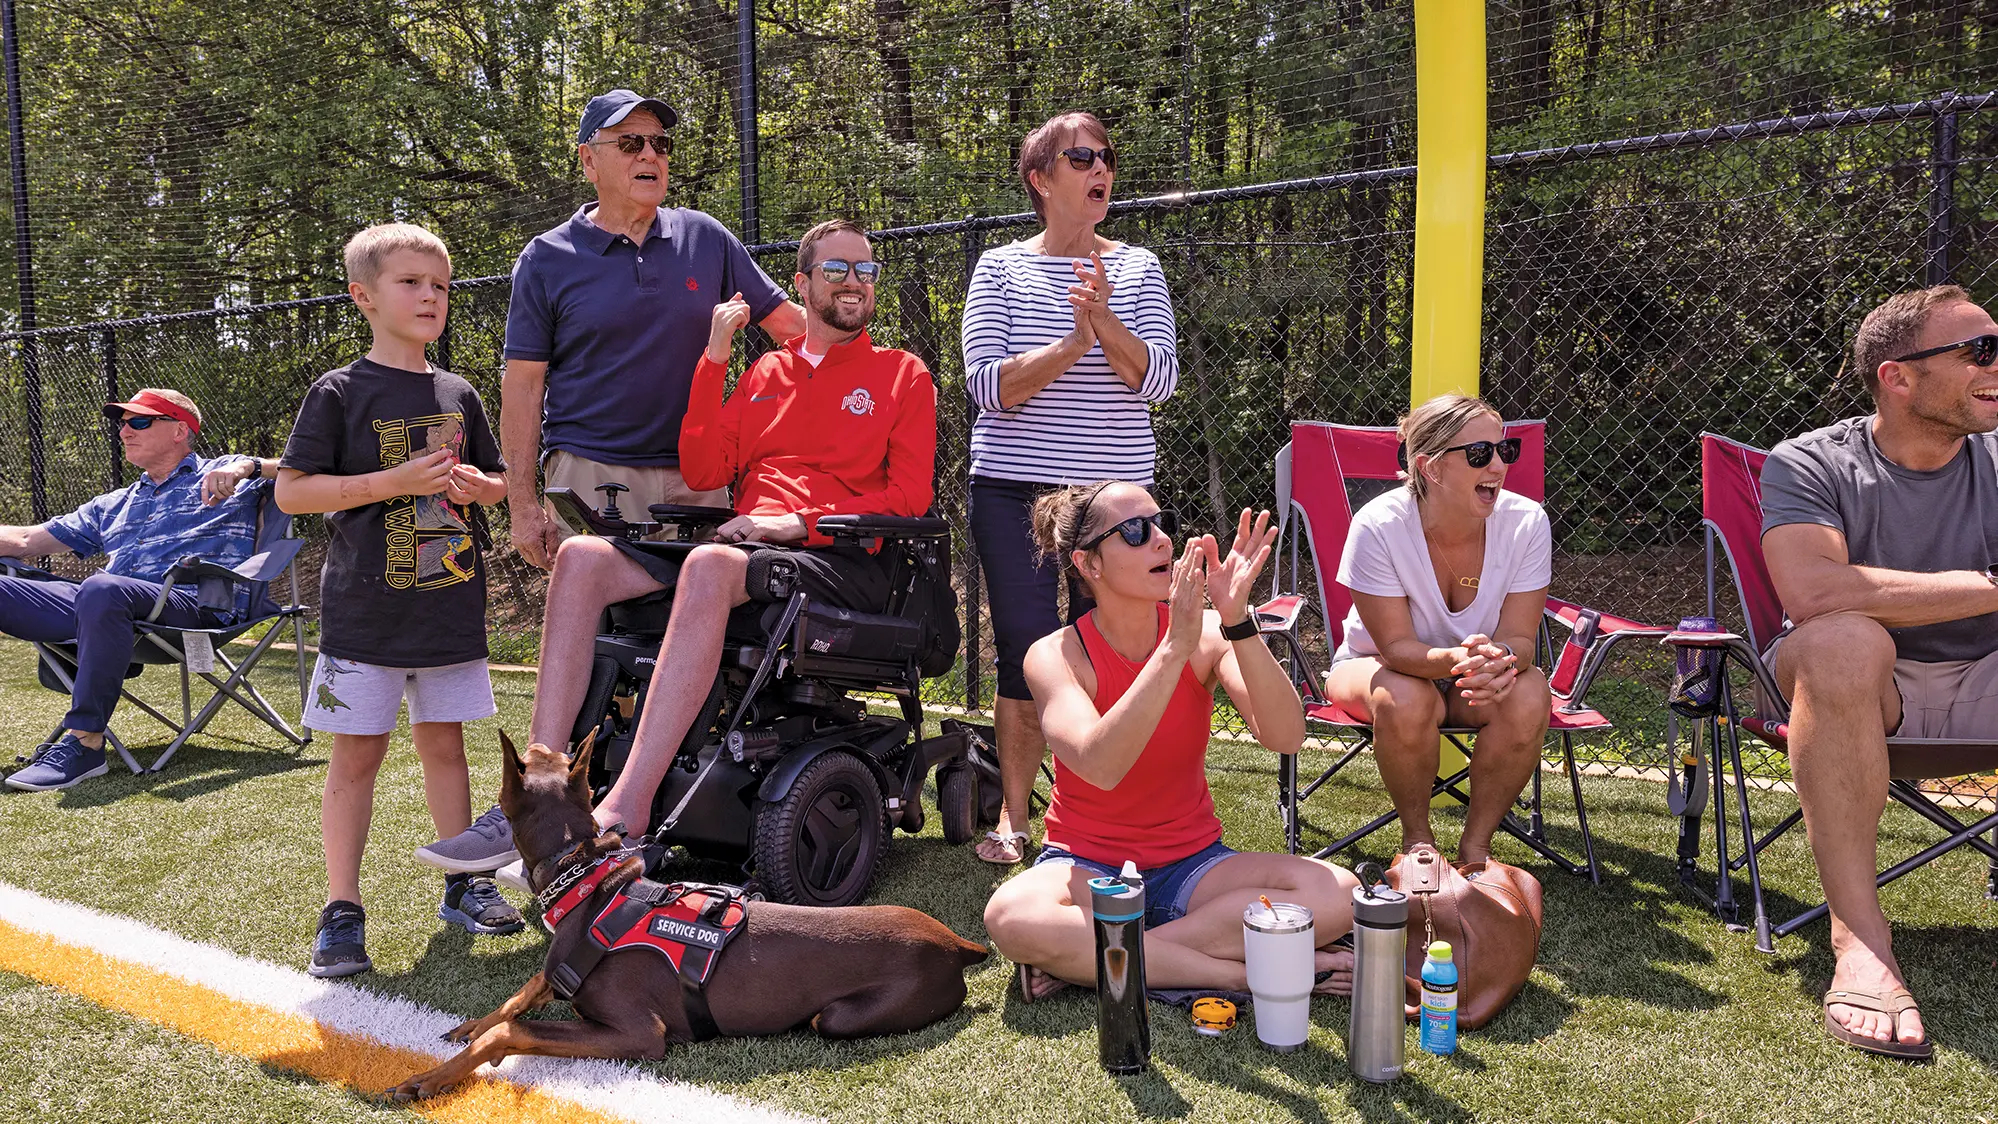 On a sunny day, spectators cheer from along a field sideline — some stand, some sit in chairs and Megan sits in the grass, beside the family Doberman, which wears a service dog vest. Everyone is cheering.